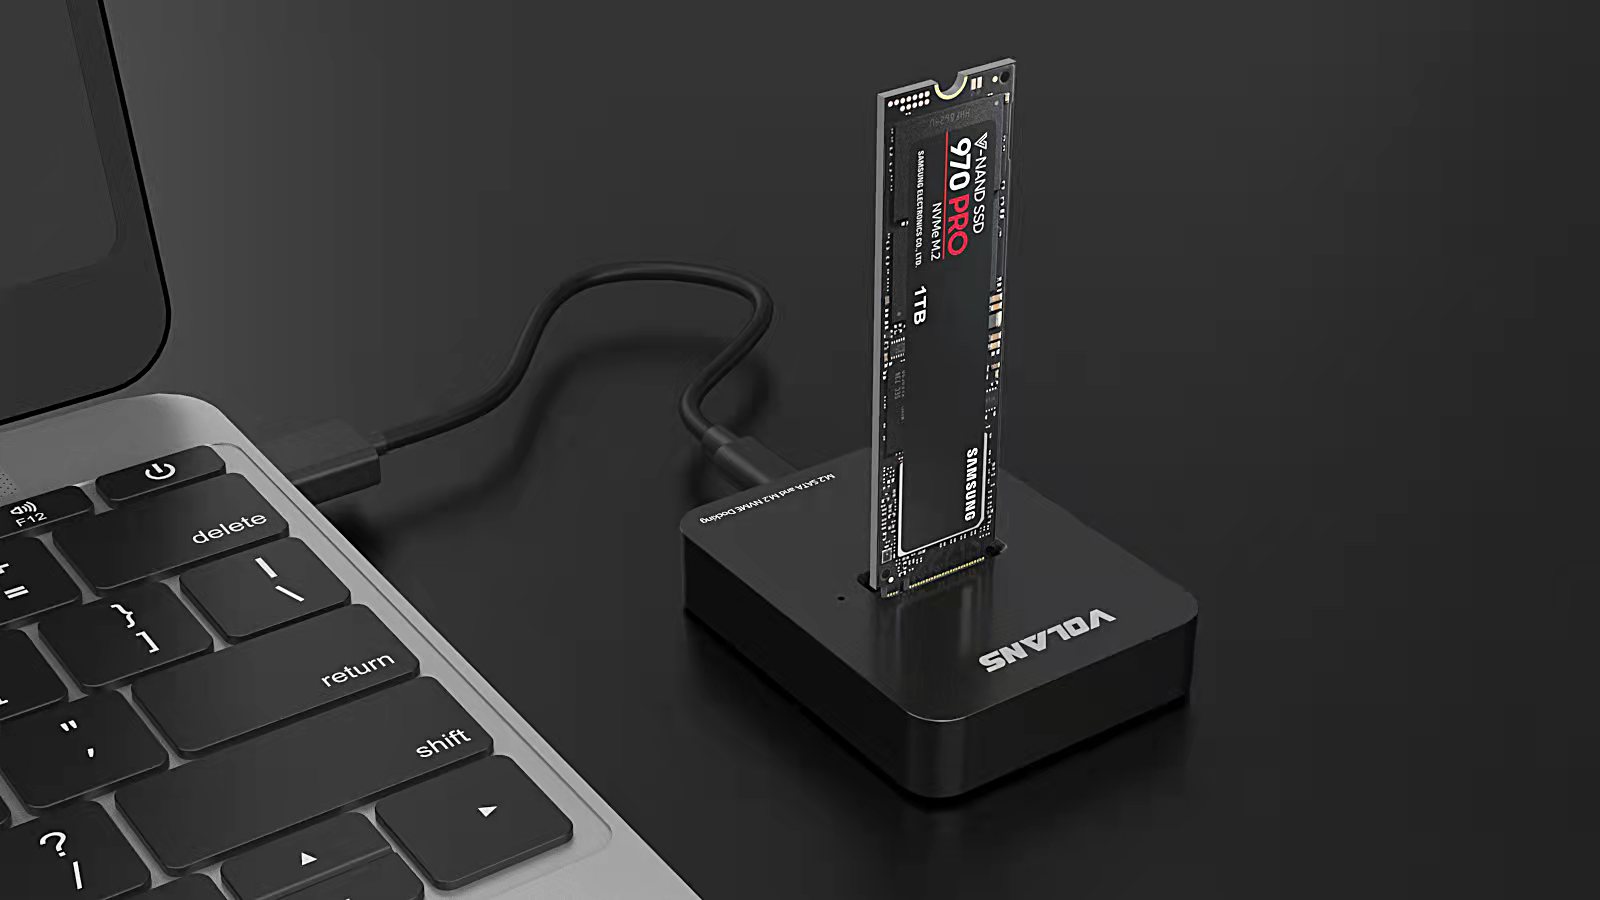 A large marketing image providing additional information about the product Volans DSM2 Aluminium USB-C (Gen 2) M.2 NVMe/SATA SSD Docking Station - Additional alt info not provided